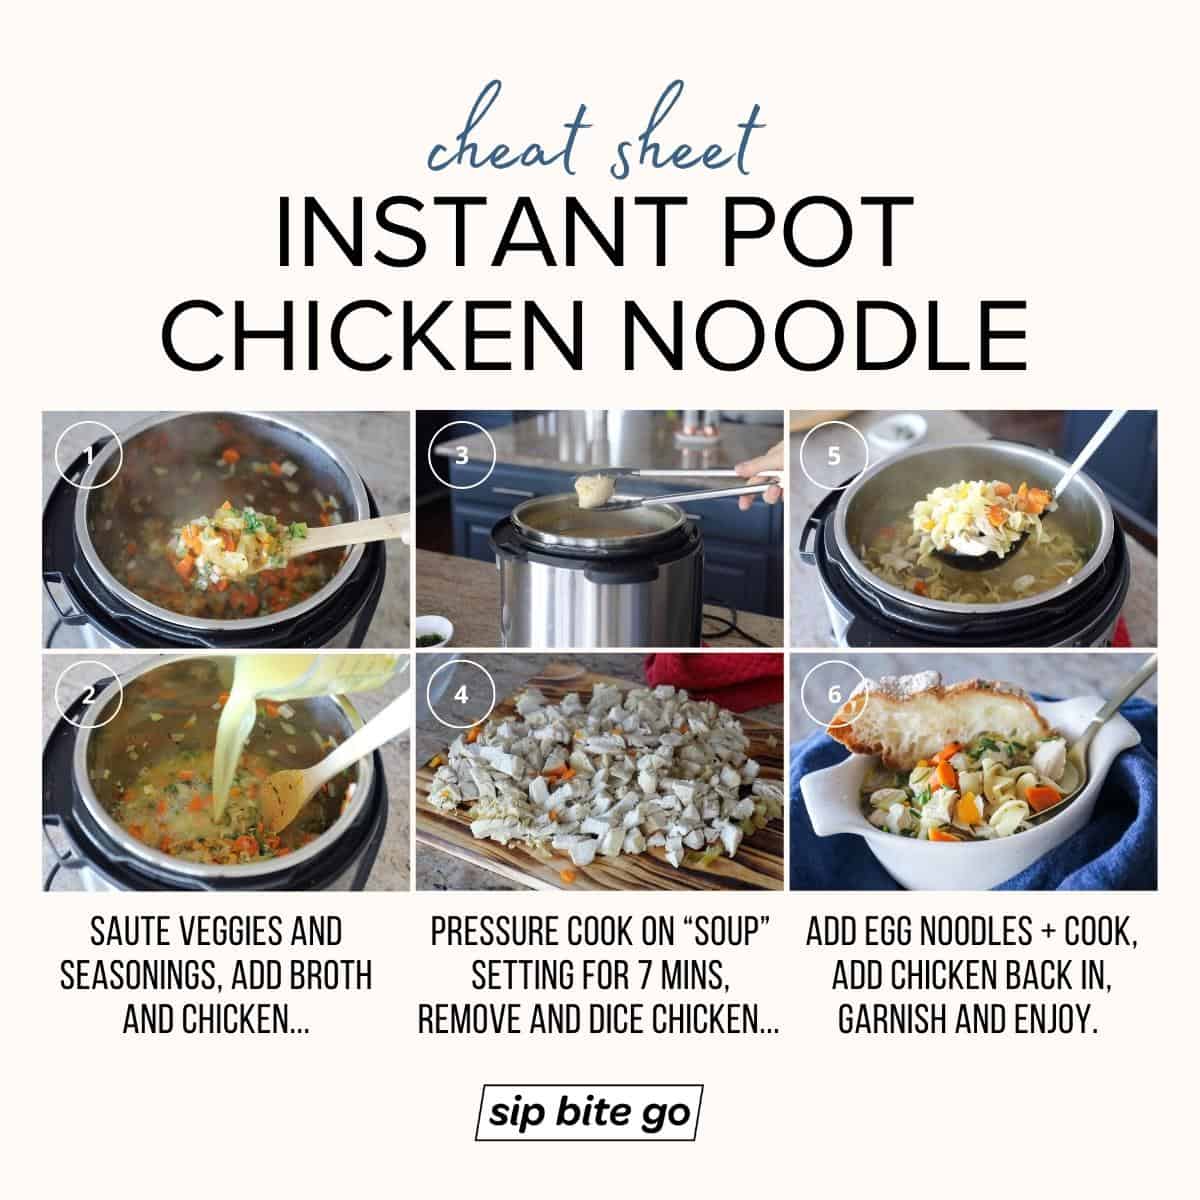 Infographic demonstrating how to make Instant Pot Chicken Noodle Soup Recipe